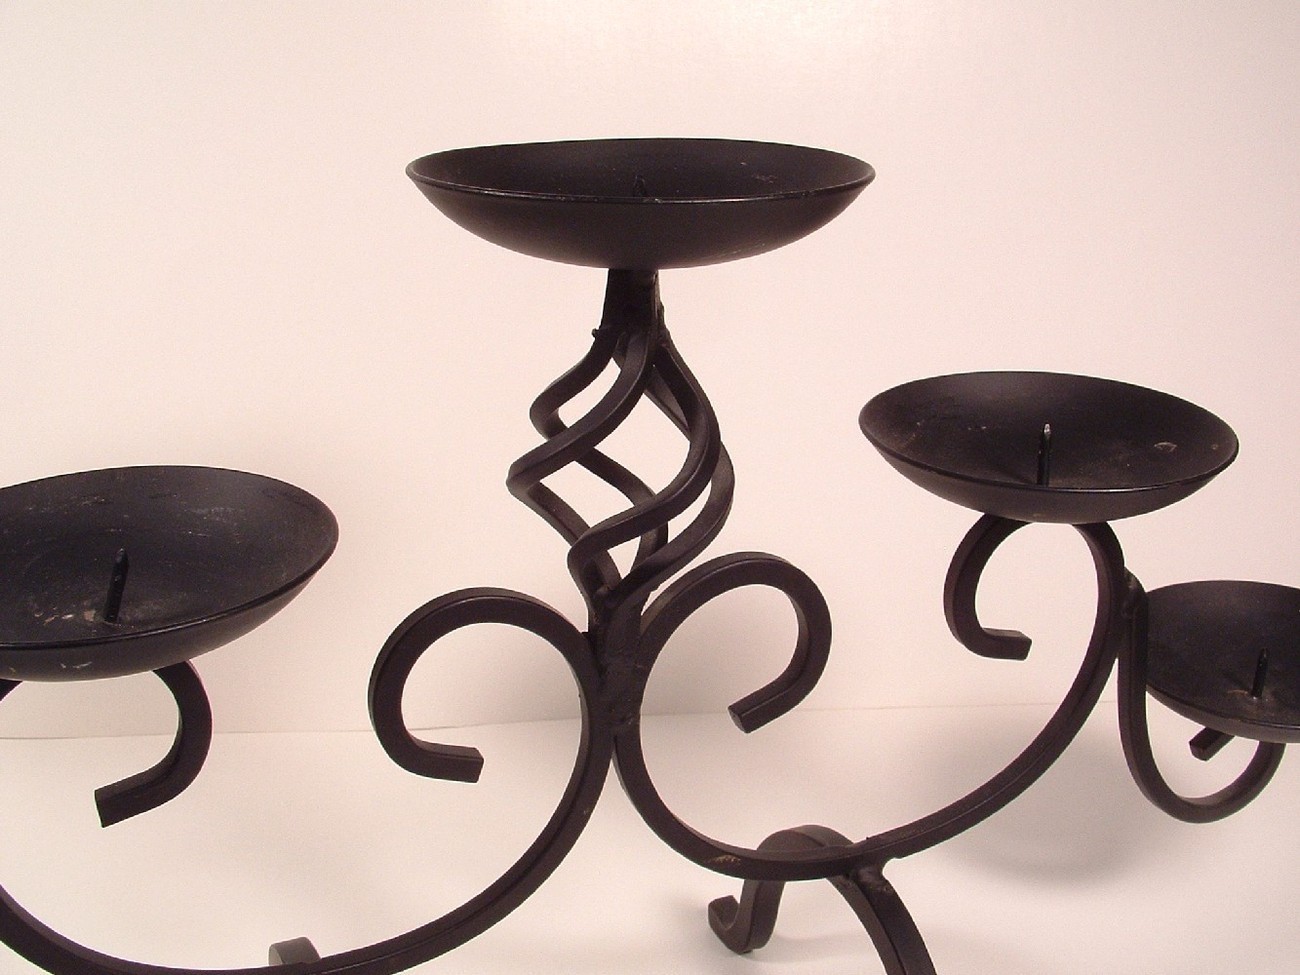 3 tier wrought iron 5 light pillar candle holder candle